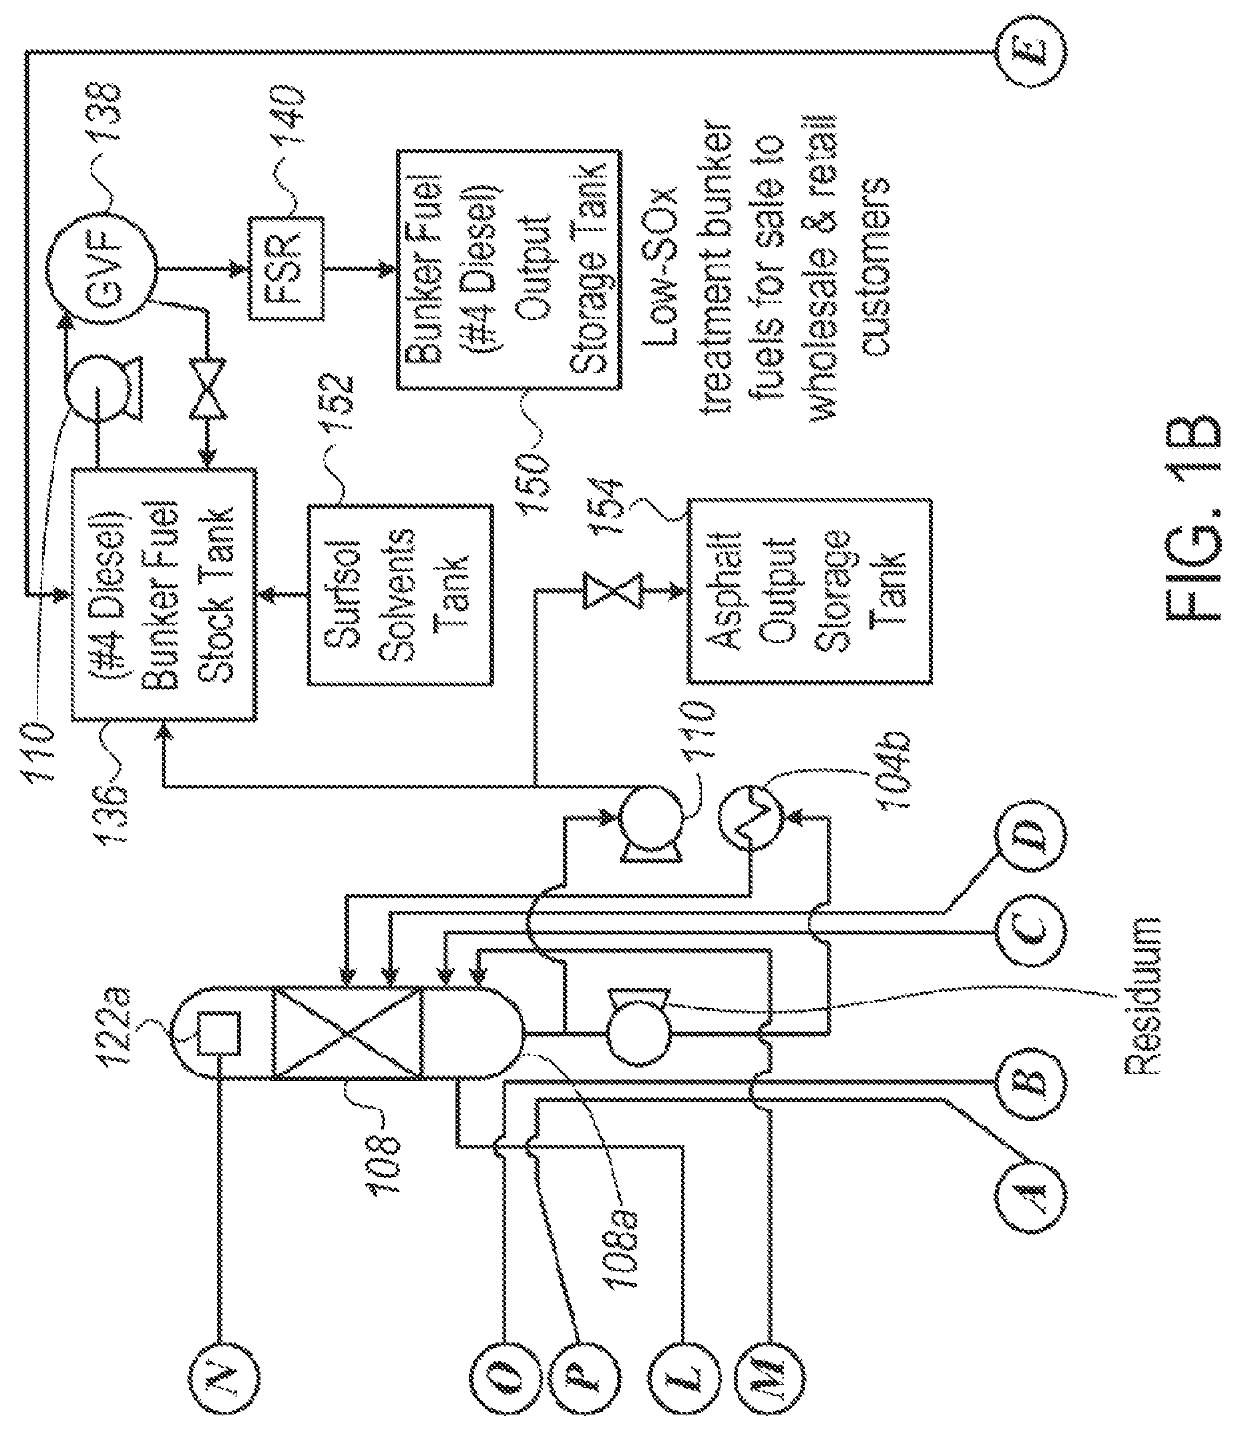 System, method and apparatuses for reduced-emission micro oil refinery